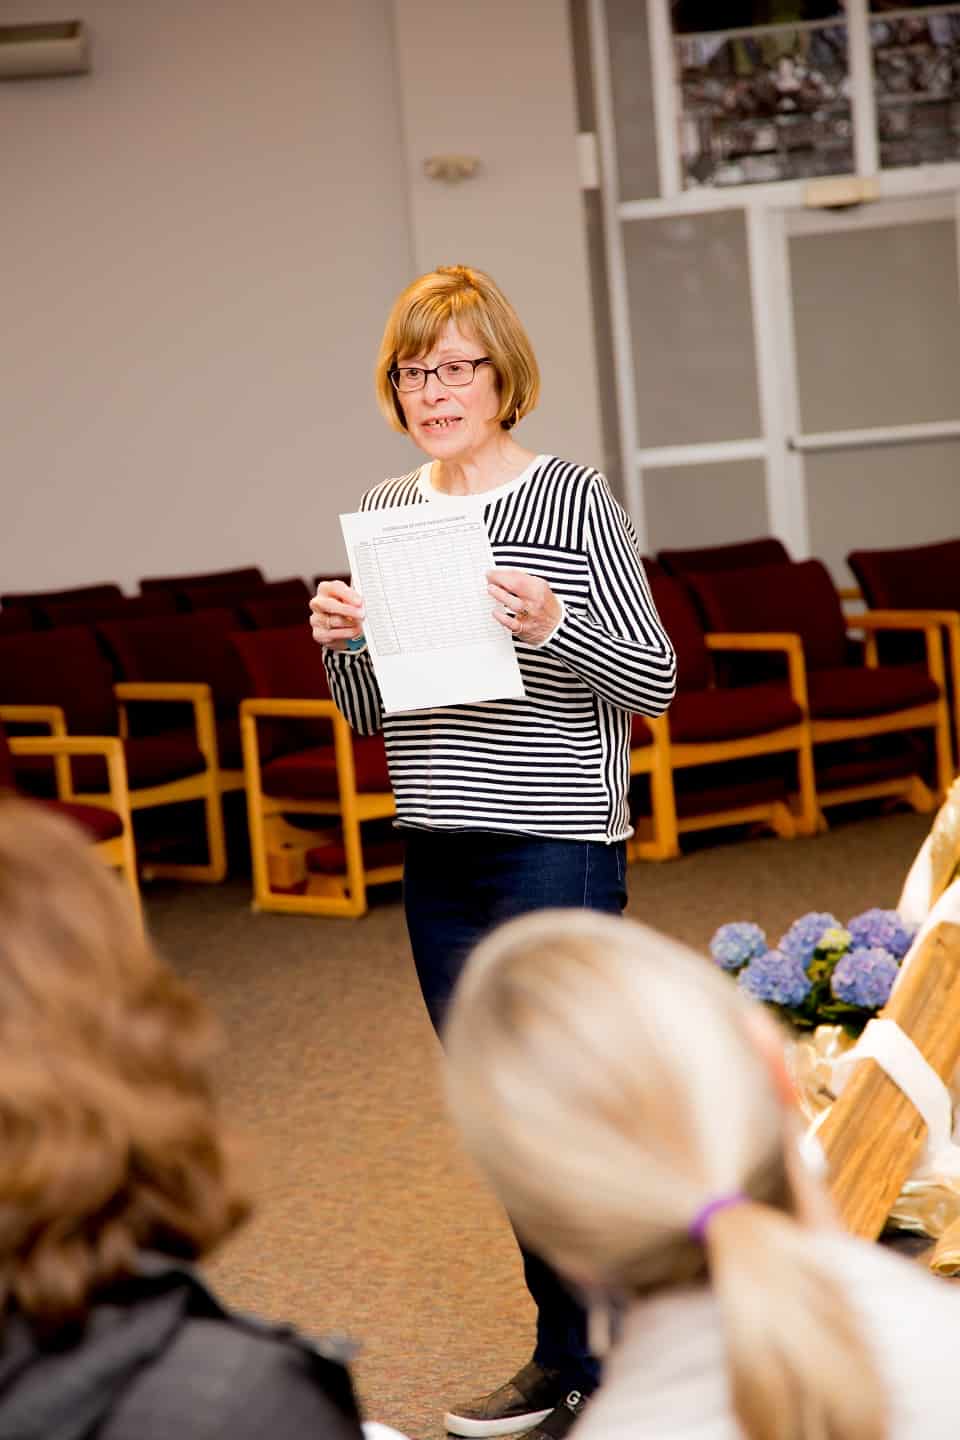 Marg Dick, a member of the Quinte Celebration of Hope prayer team, tells CLWC participants about the Celebration’s prayer opportunities.